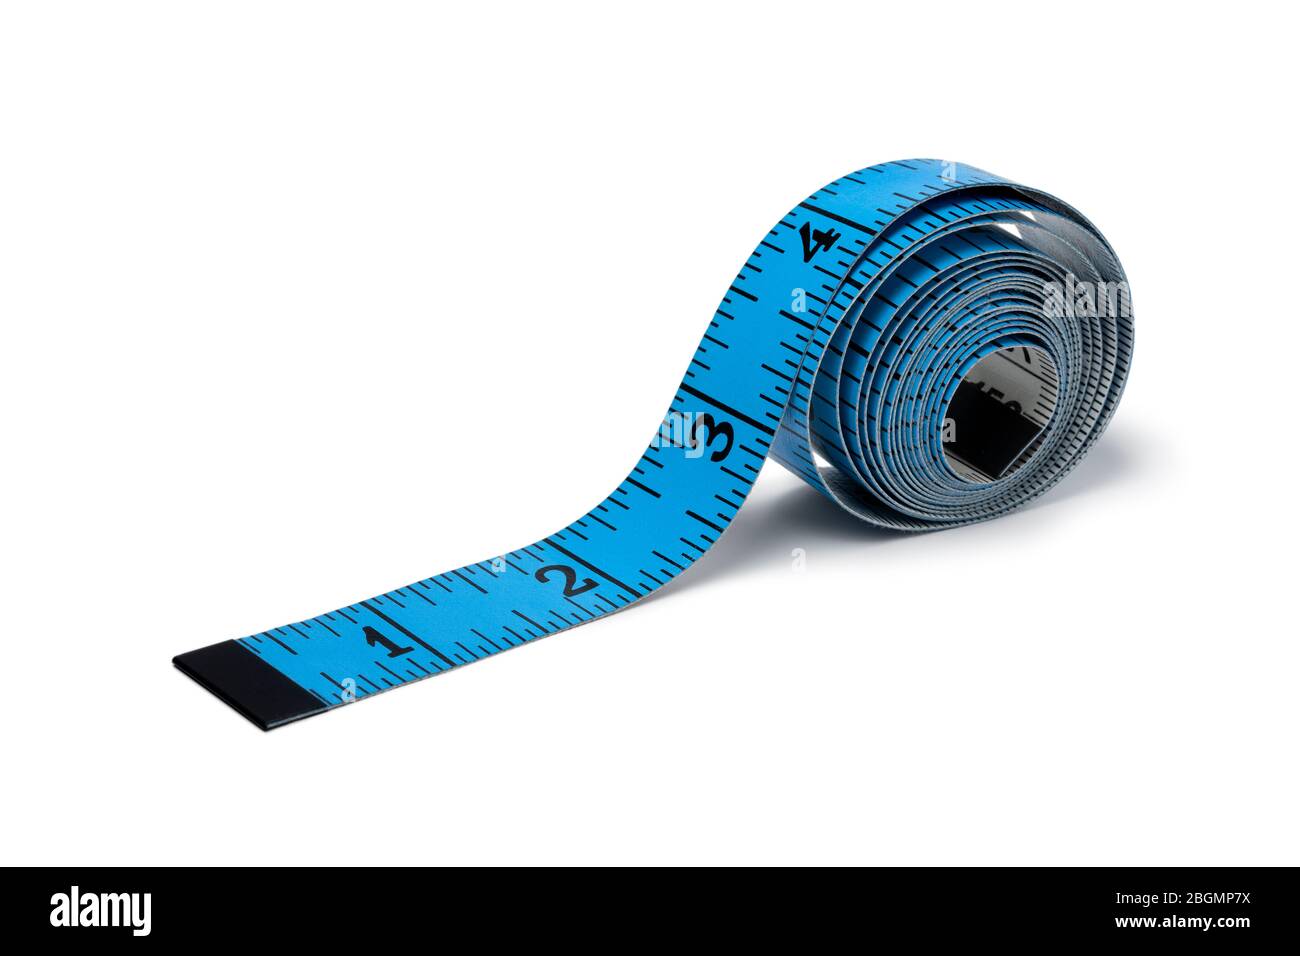 Tape measure in centimeters Stock Photo by NomadSoul1